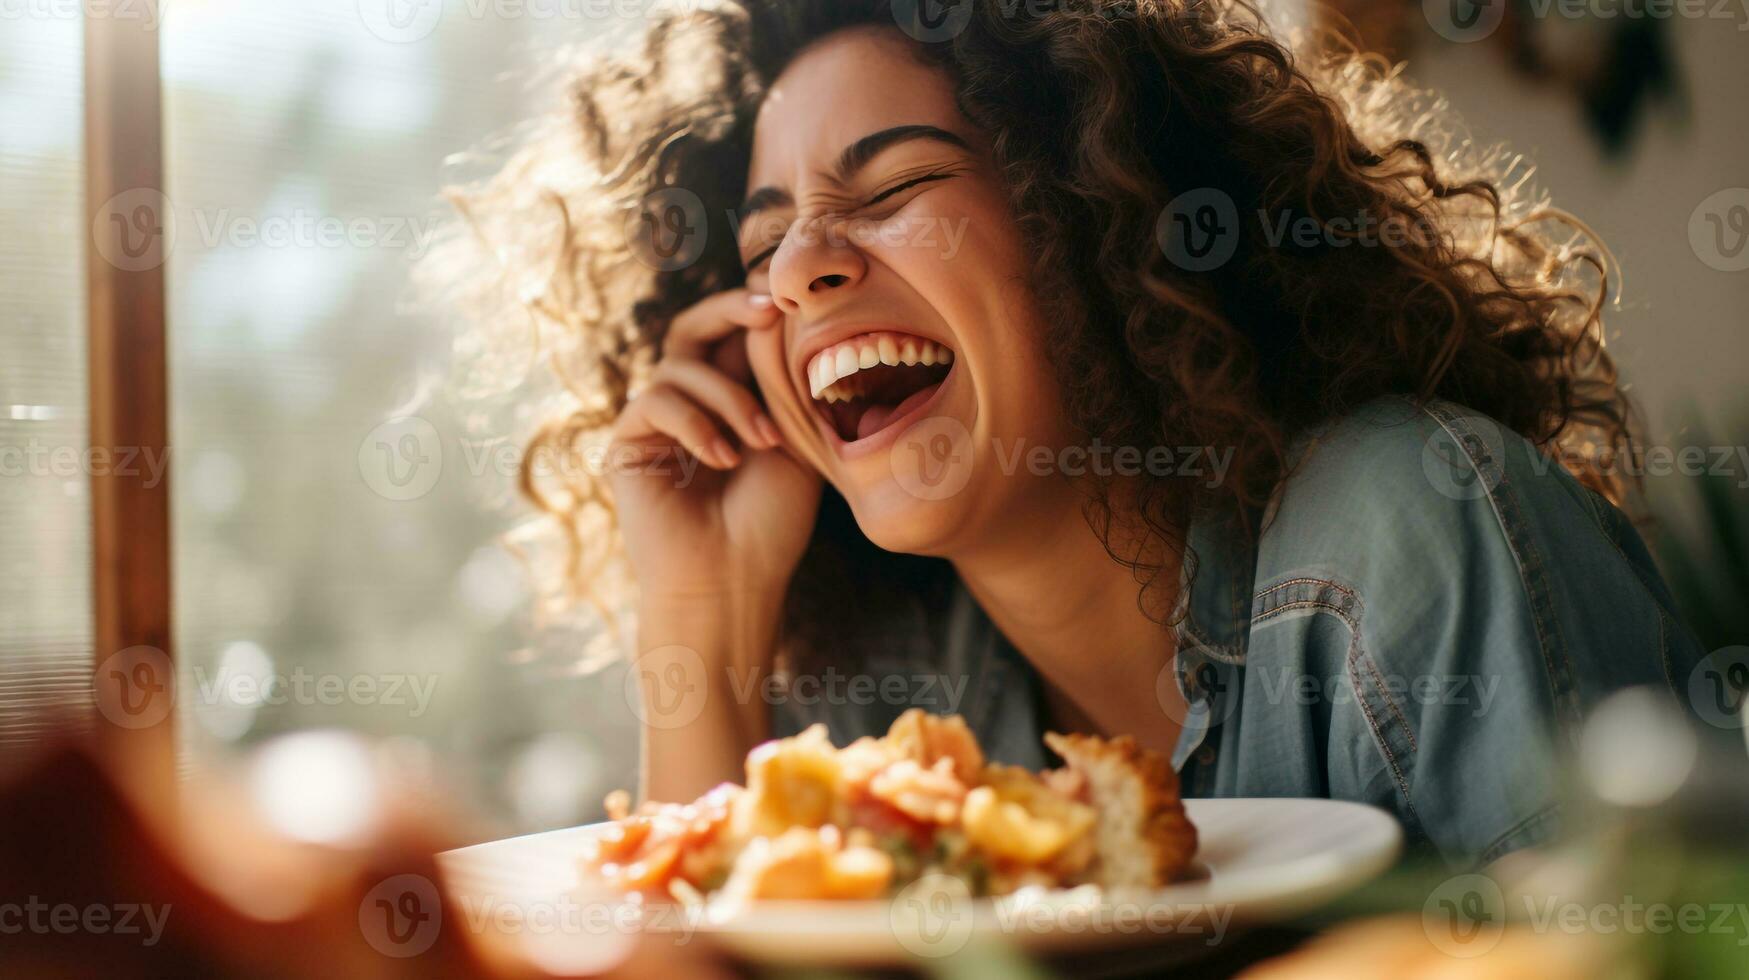 A person laughing as they eat their favorite food, mental health images, photorealistic illustration photo